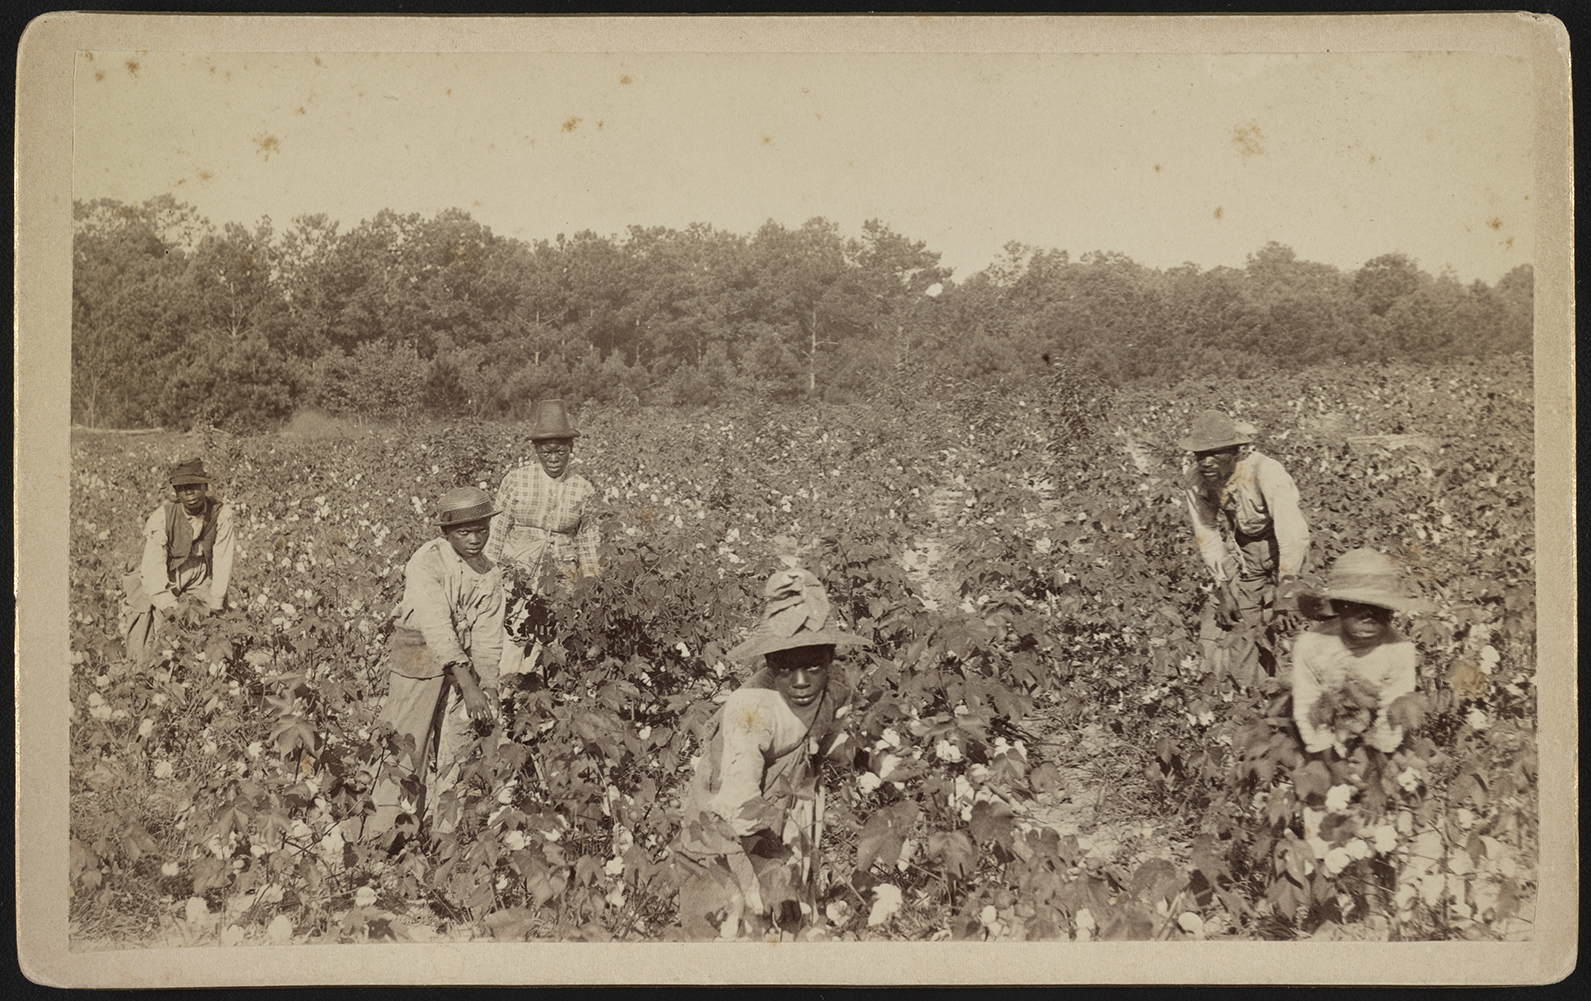 A black and white photograph of six African Americans working in a field, while looking intently into the camera.